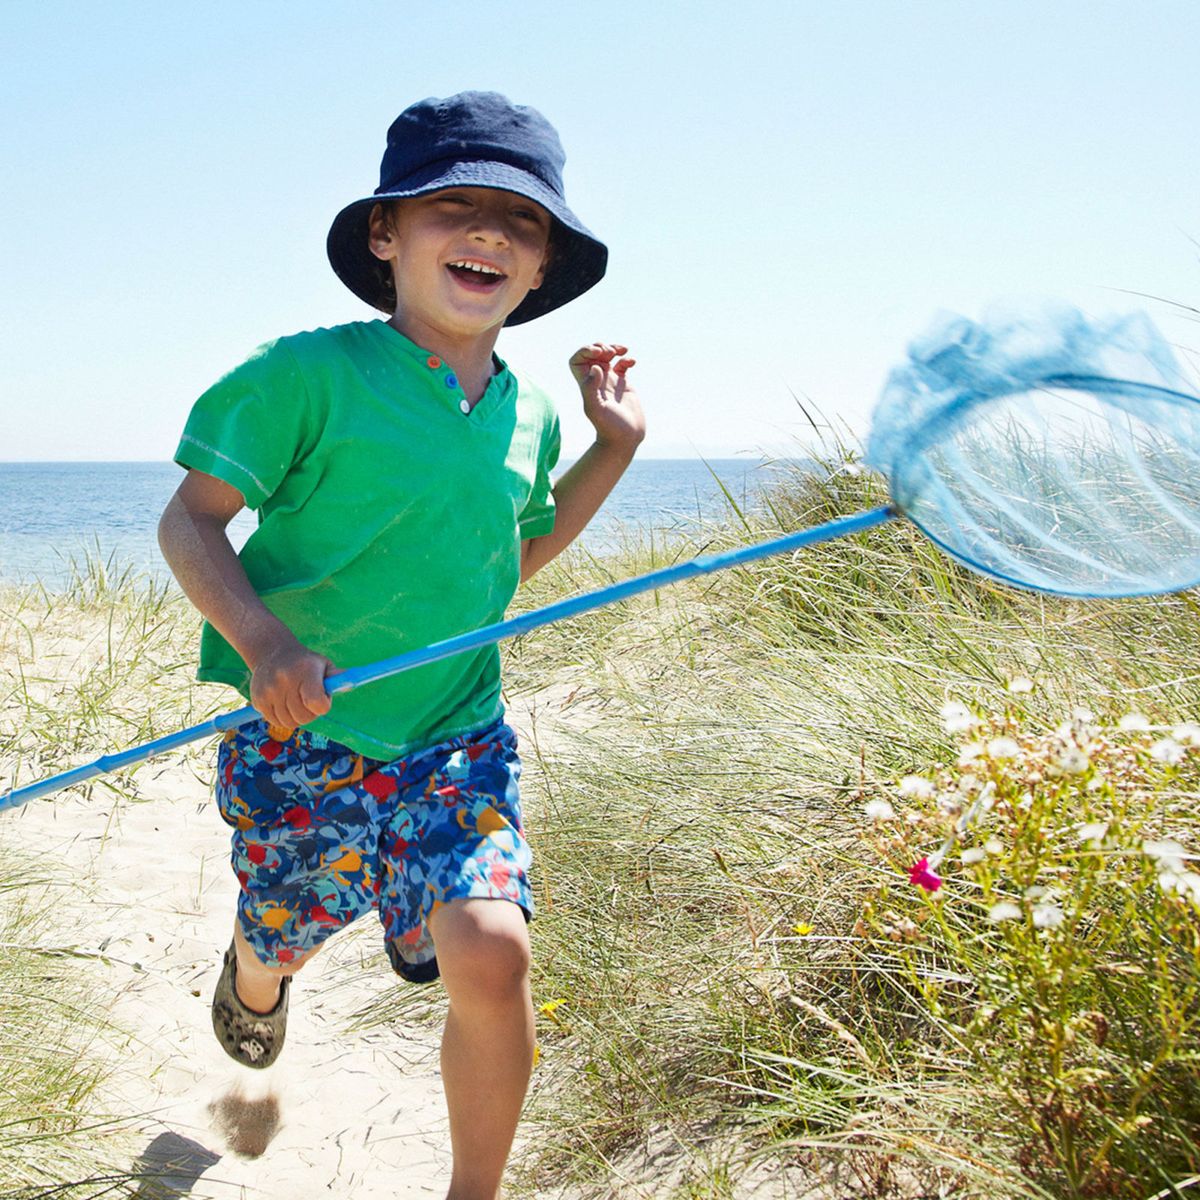 6 things you can do to look after your children's health in the summer